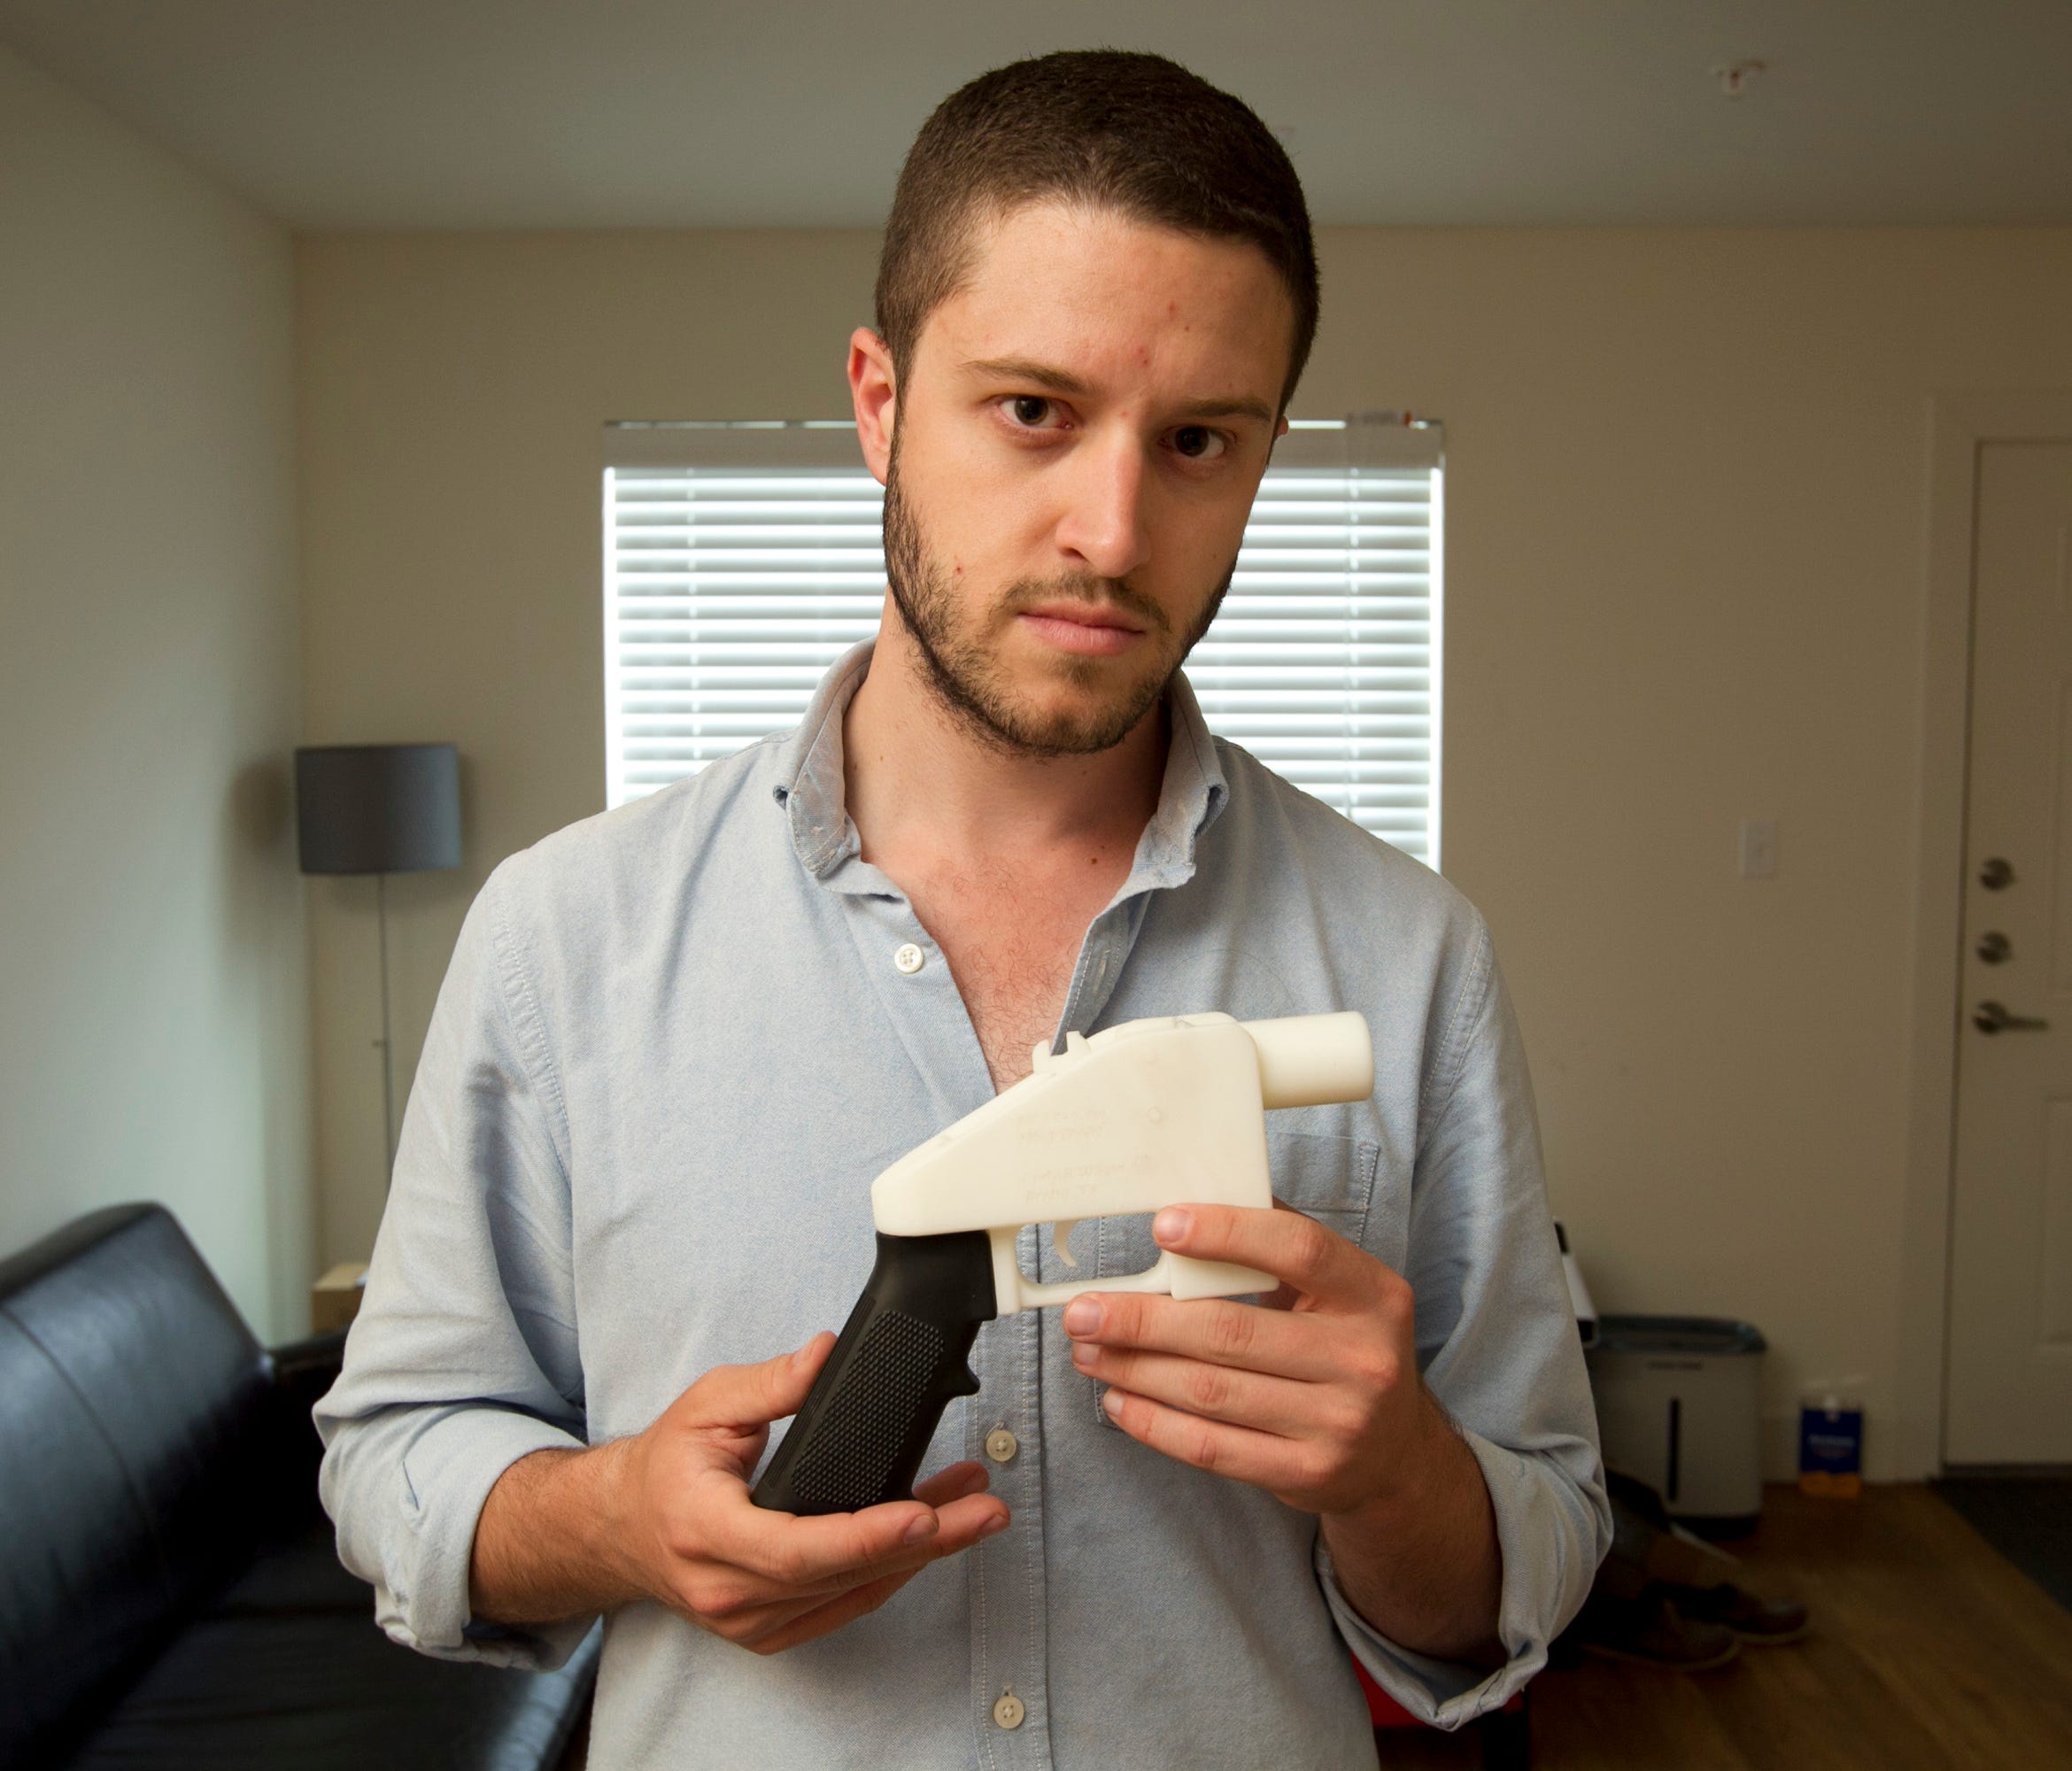 Cody Wilson, the founder of Defense Distributed, shows a plastic handgun made on a 3D printer at his home in Austin, Texas.